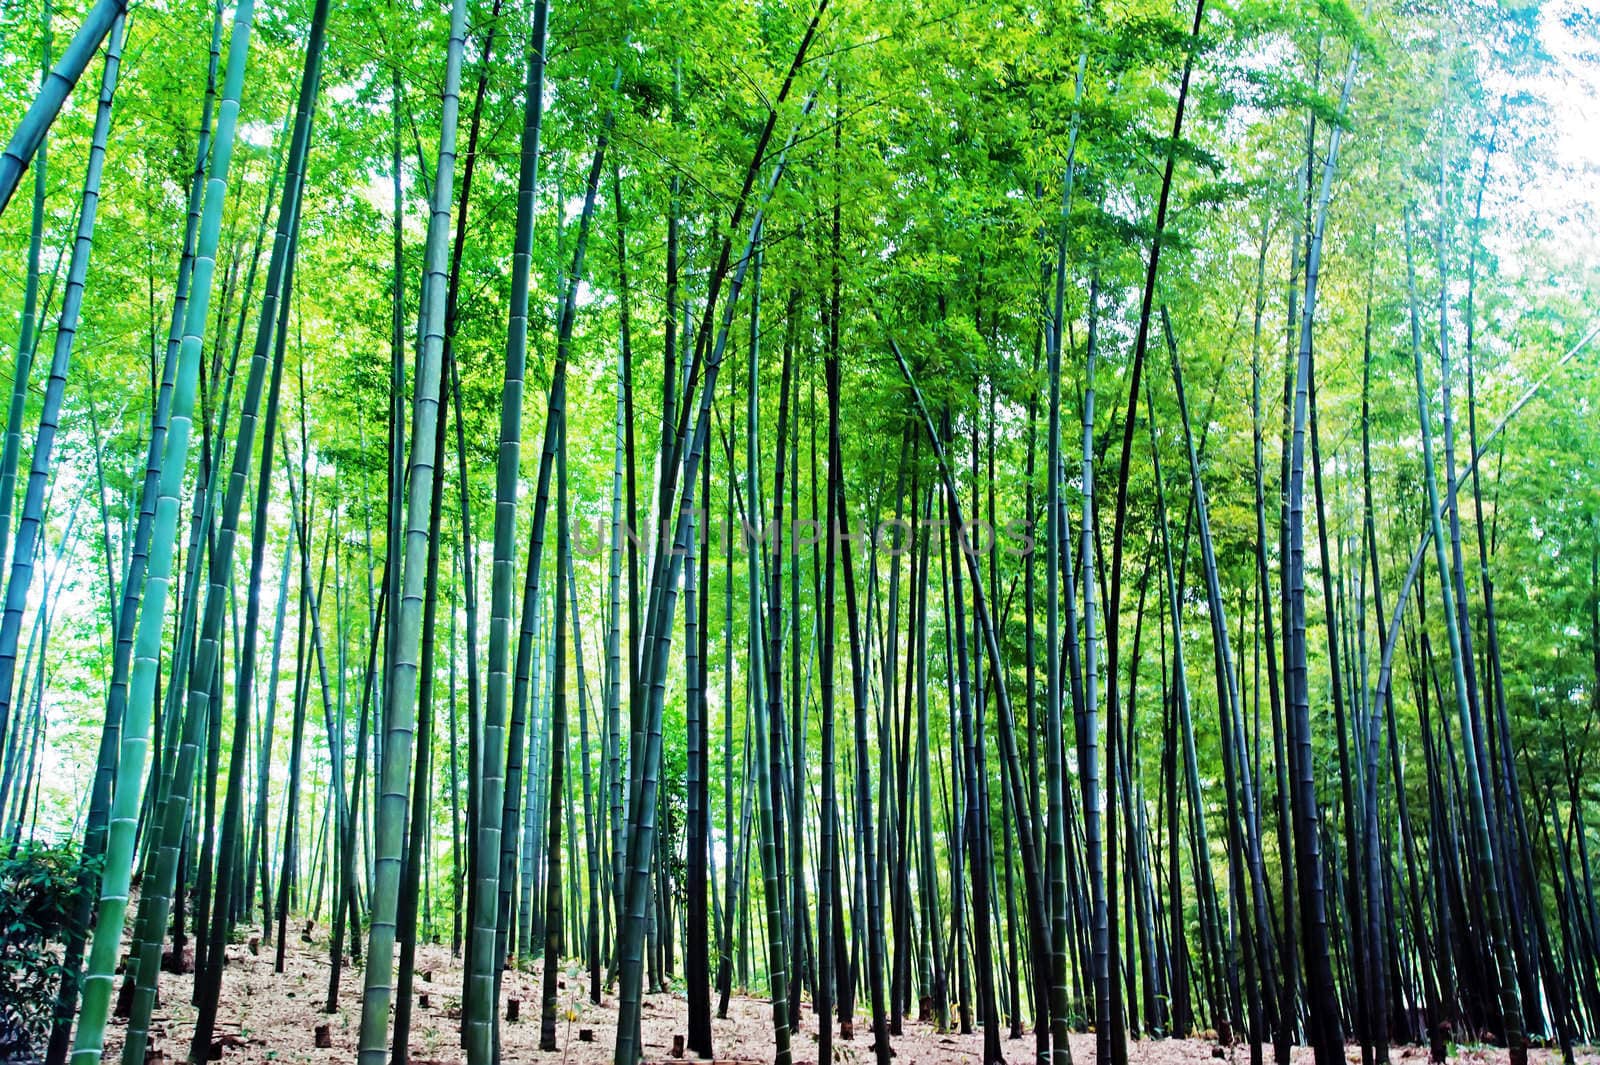 Bamboo grown in the southern provinces of mainland China